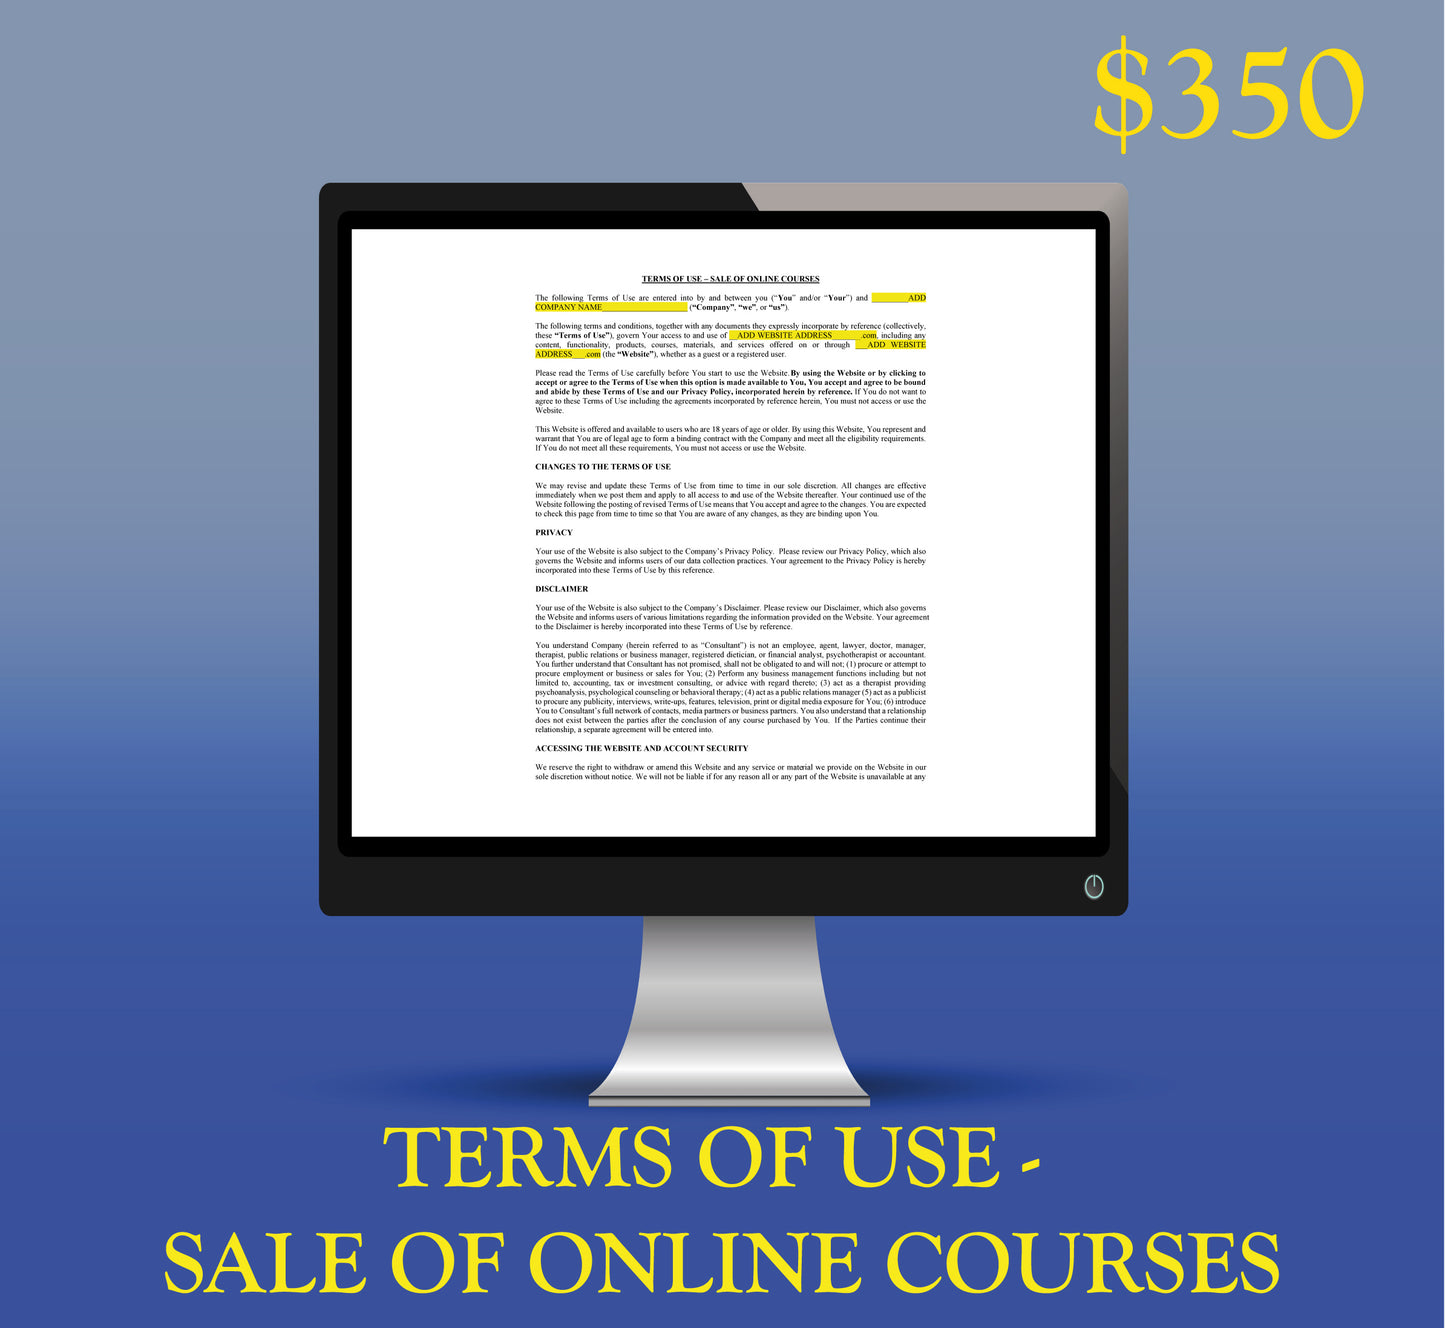 Terms of Use – Sale of Online Courses